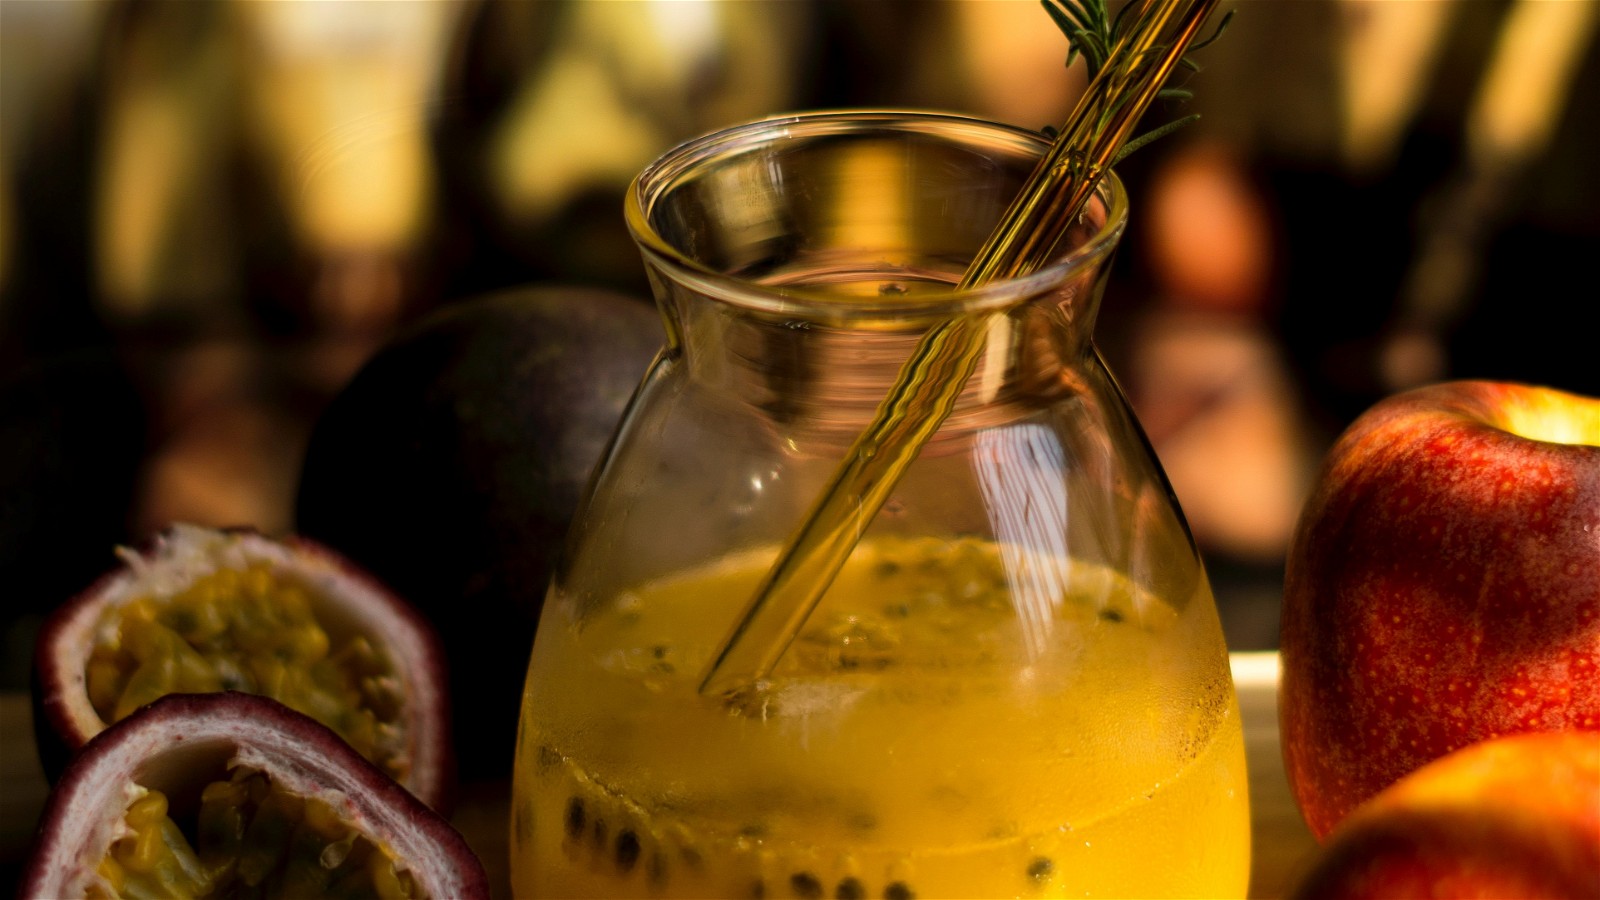 Image of Passion Fruit Syrup